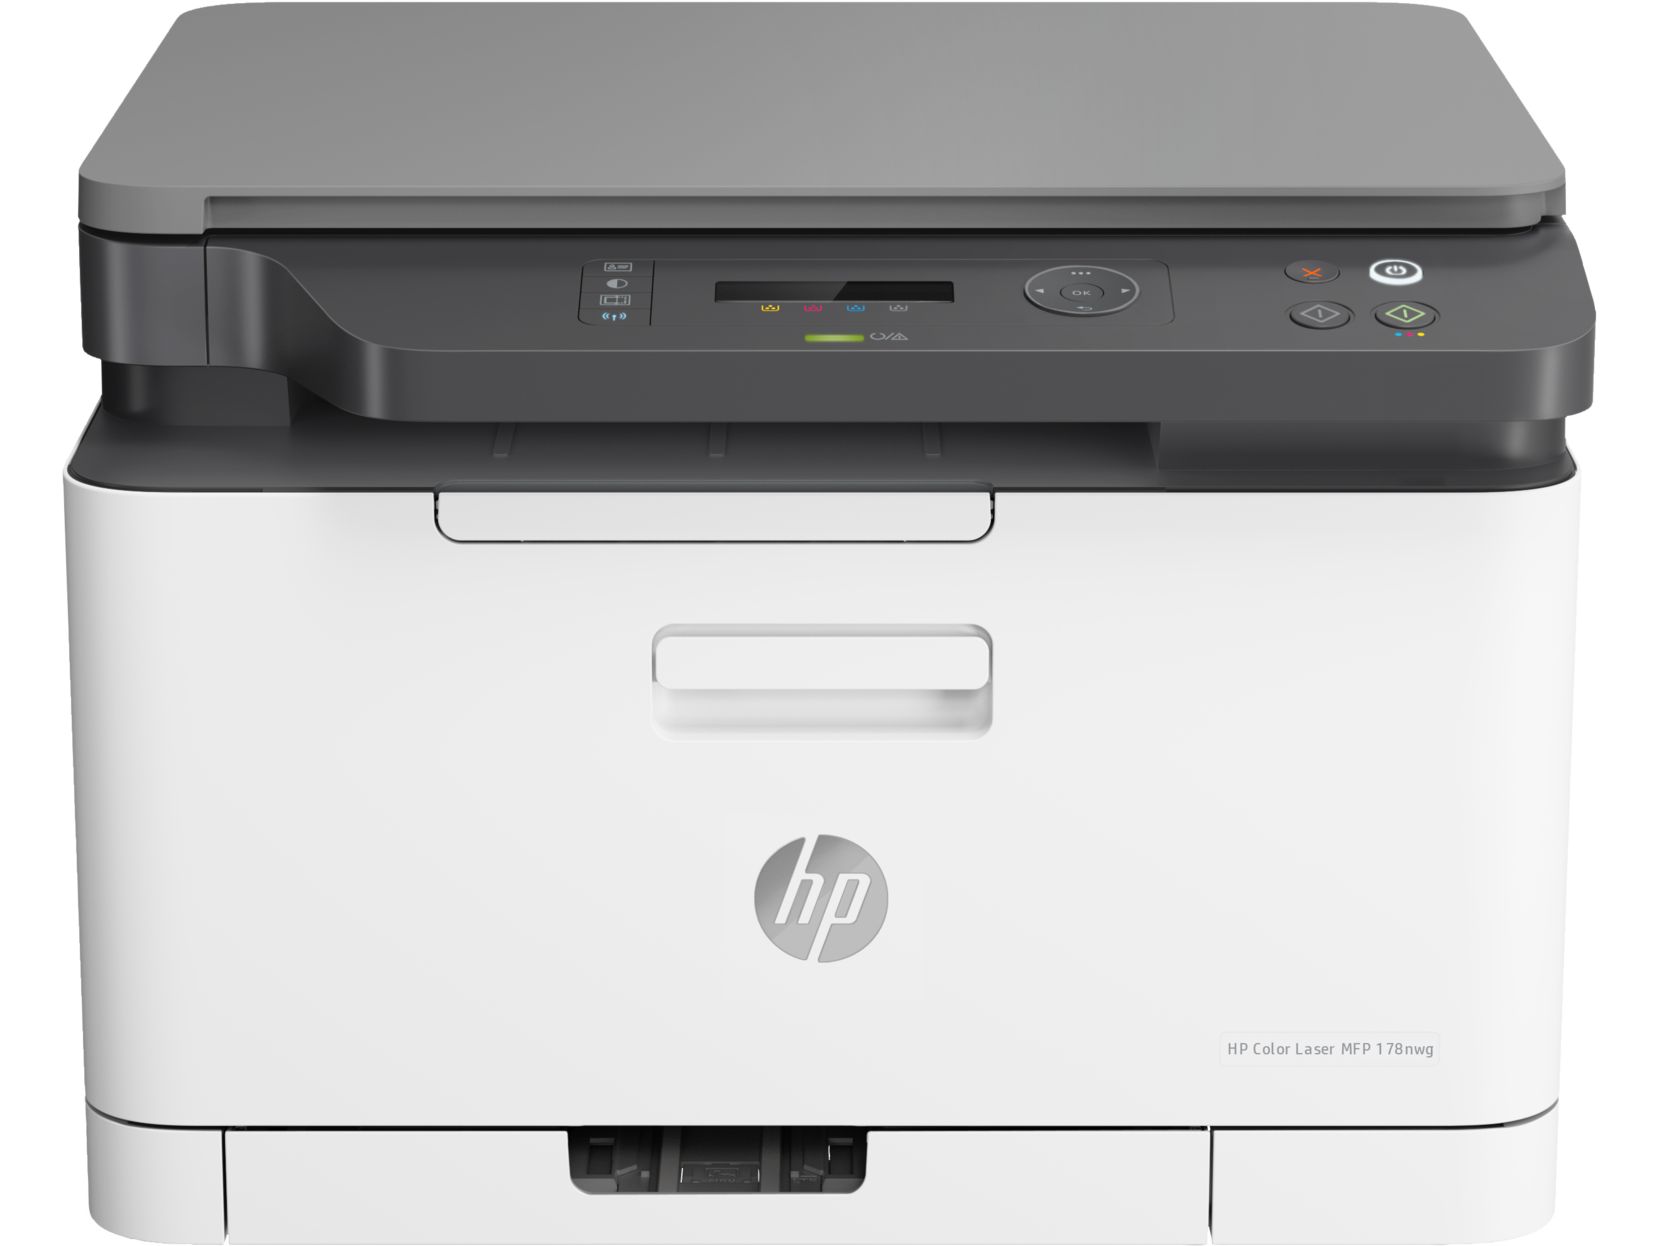 МФУ HP Color Laser MFP 178nw мфу hp color laser 178nw